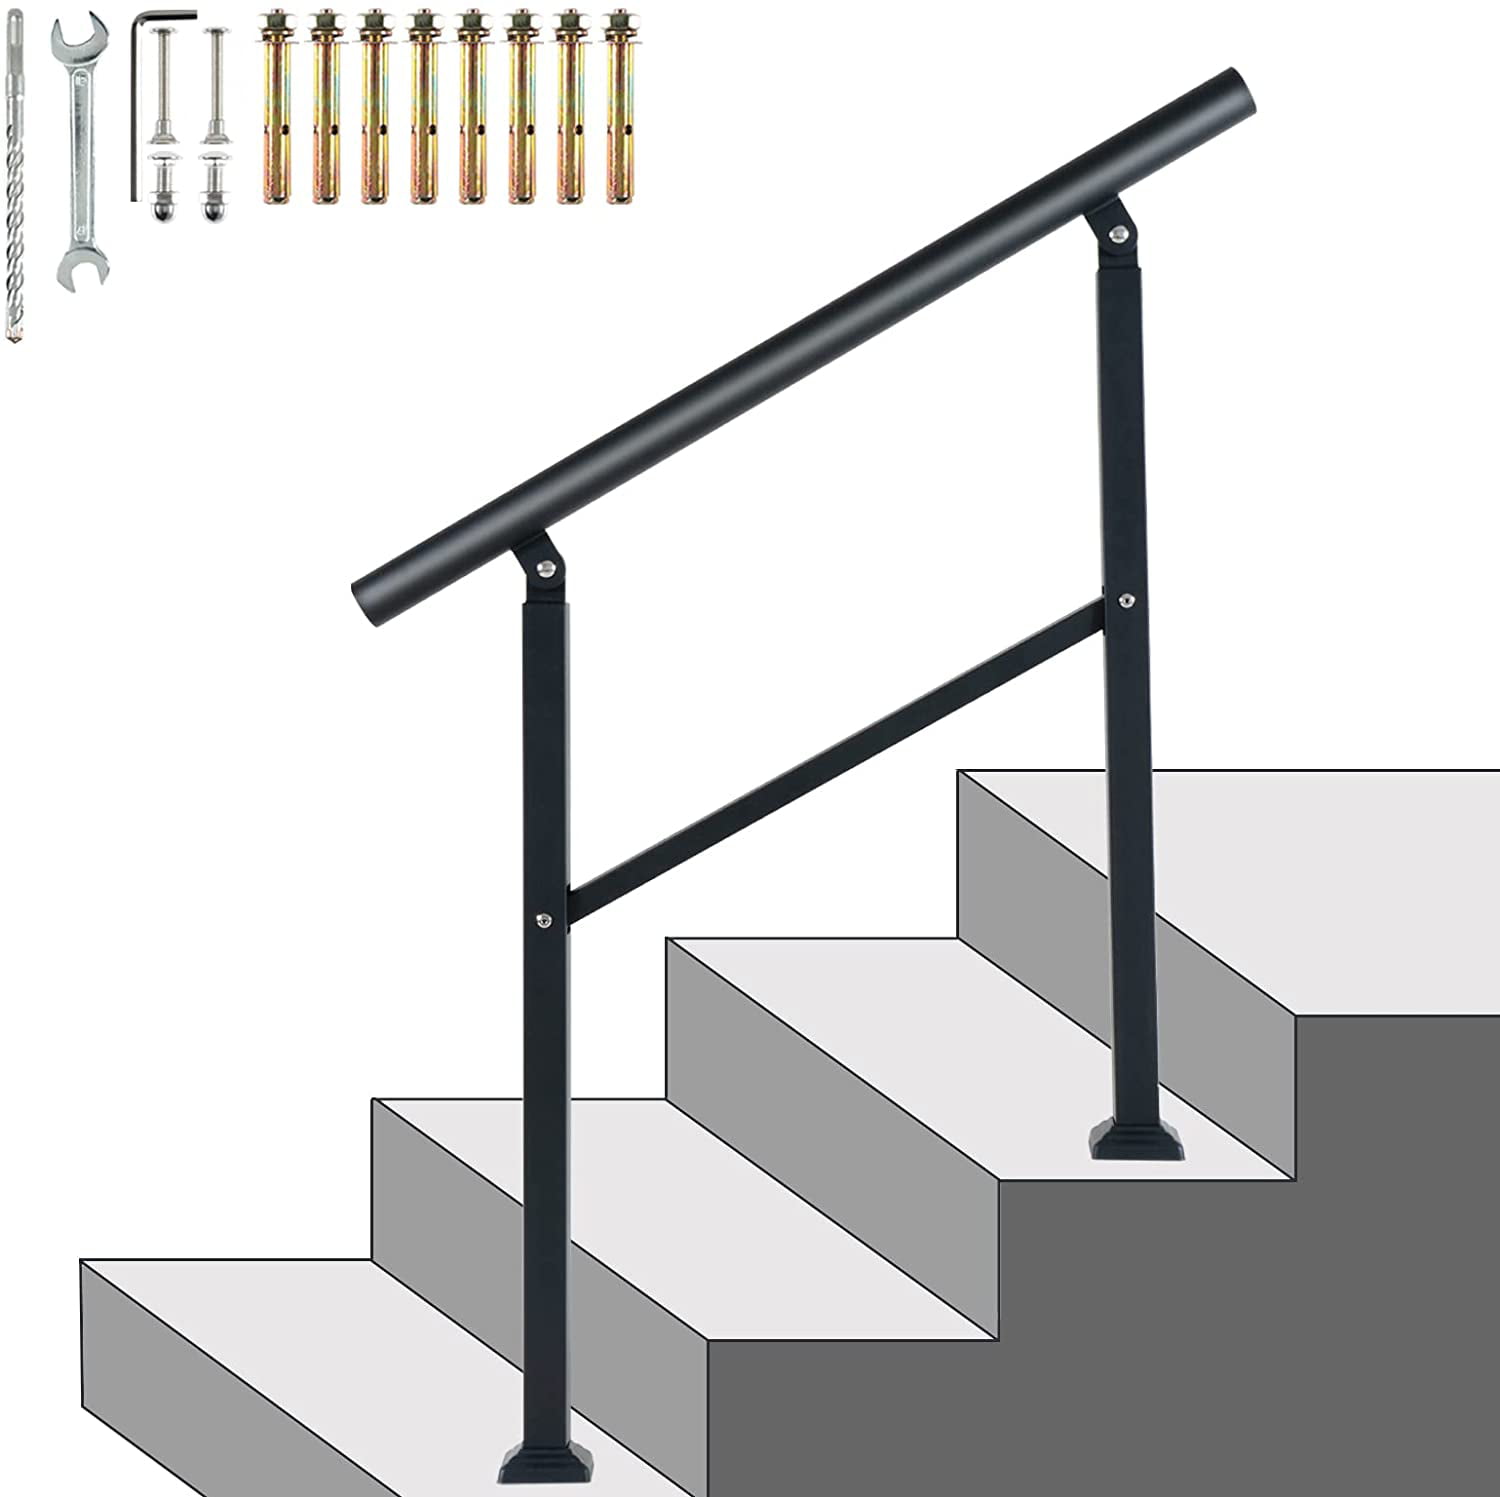 Corner Handrail For 1-3 Step Stairs Perfect Railing For 1-3 Garage Stairs Wall Handrail Indoor Or Outdoor Patio Or Interior Stairways